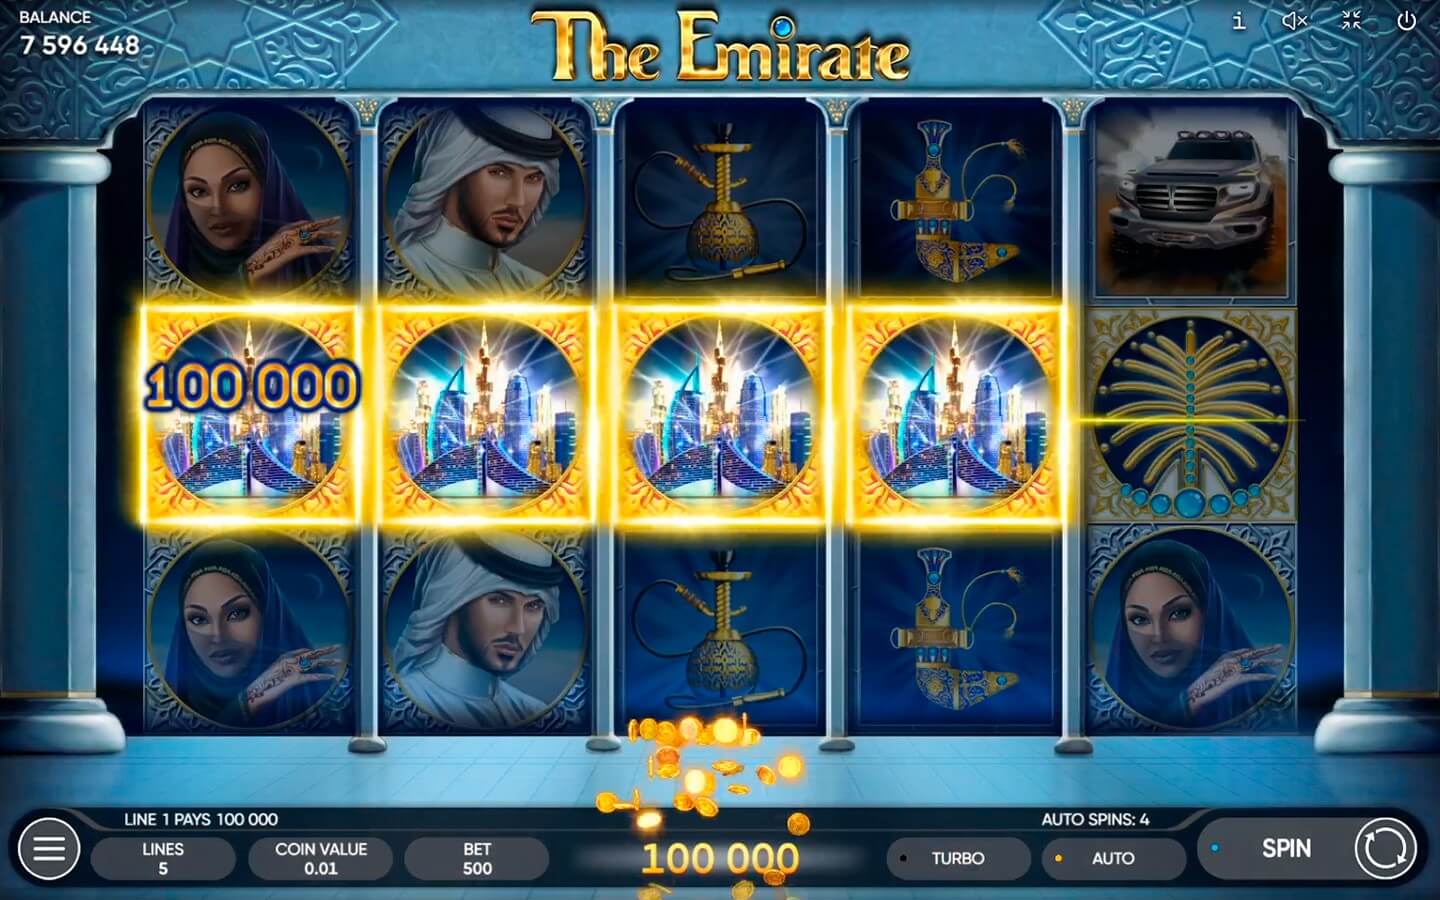 The emirate